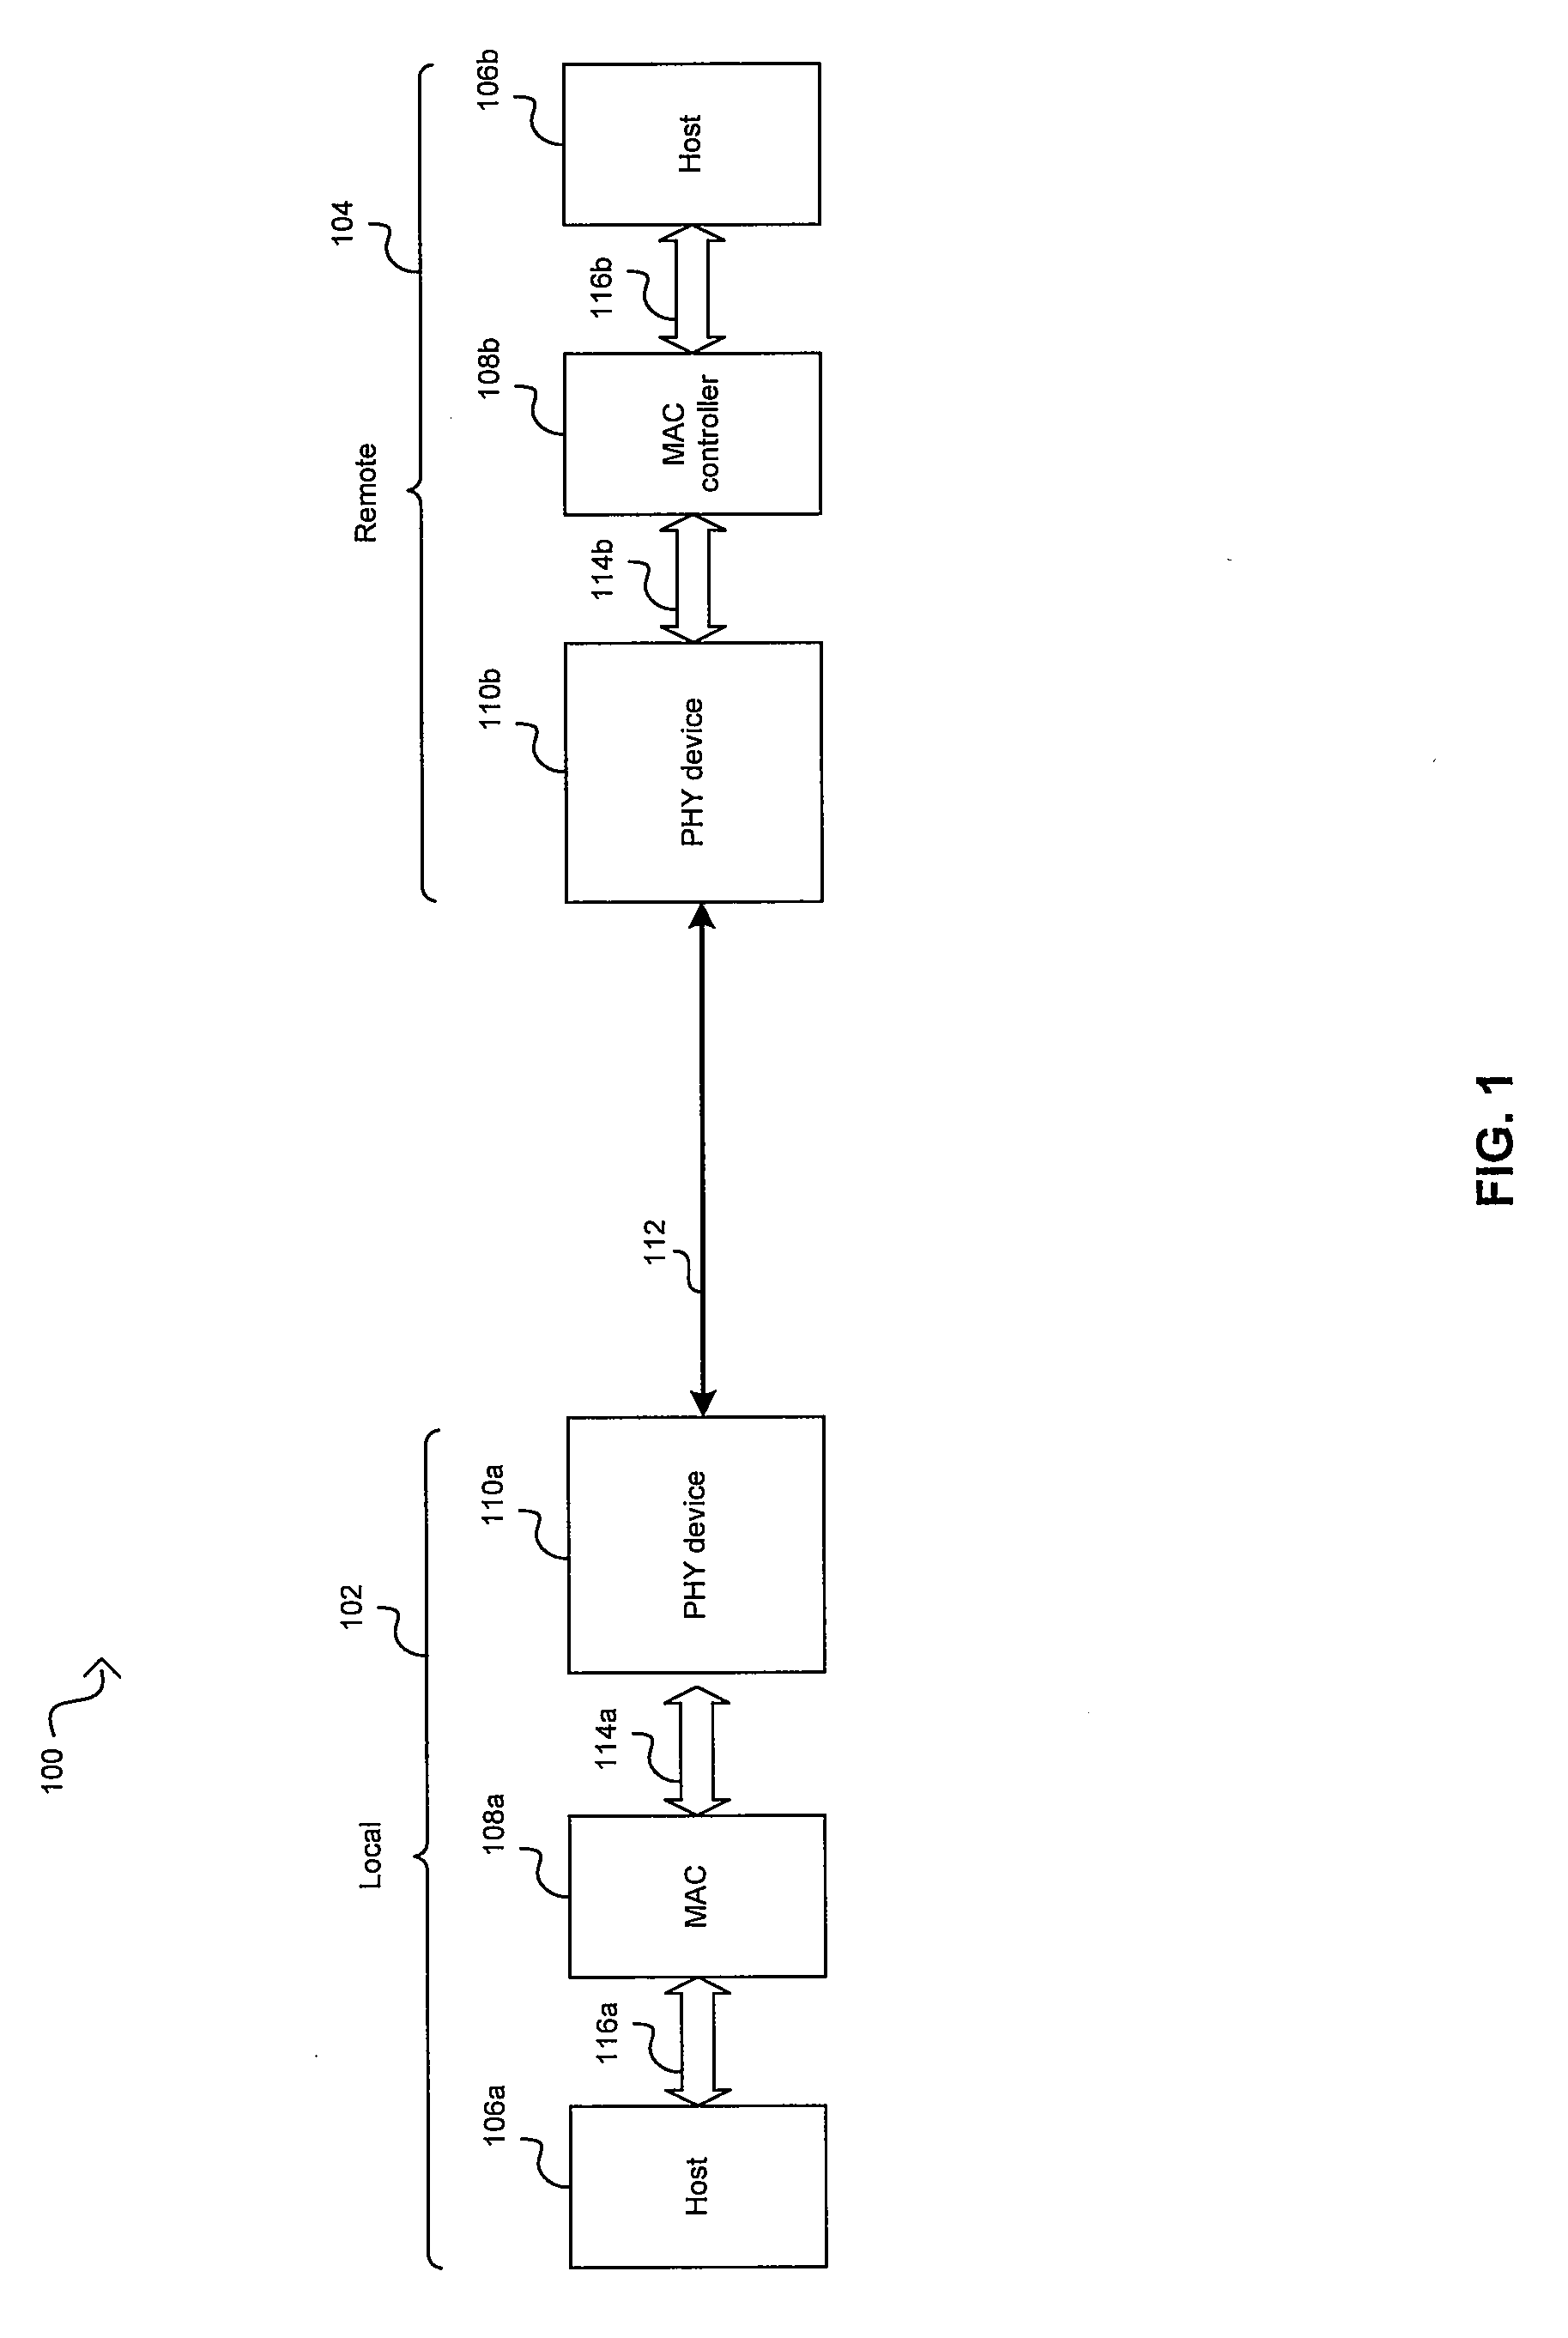 Method And System For Training An Ethernet Channel Based On An Active Channel To Support Energy Efficient Ethernet Networks